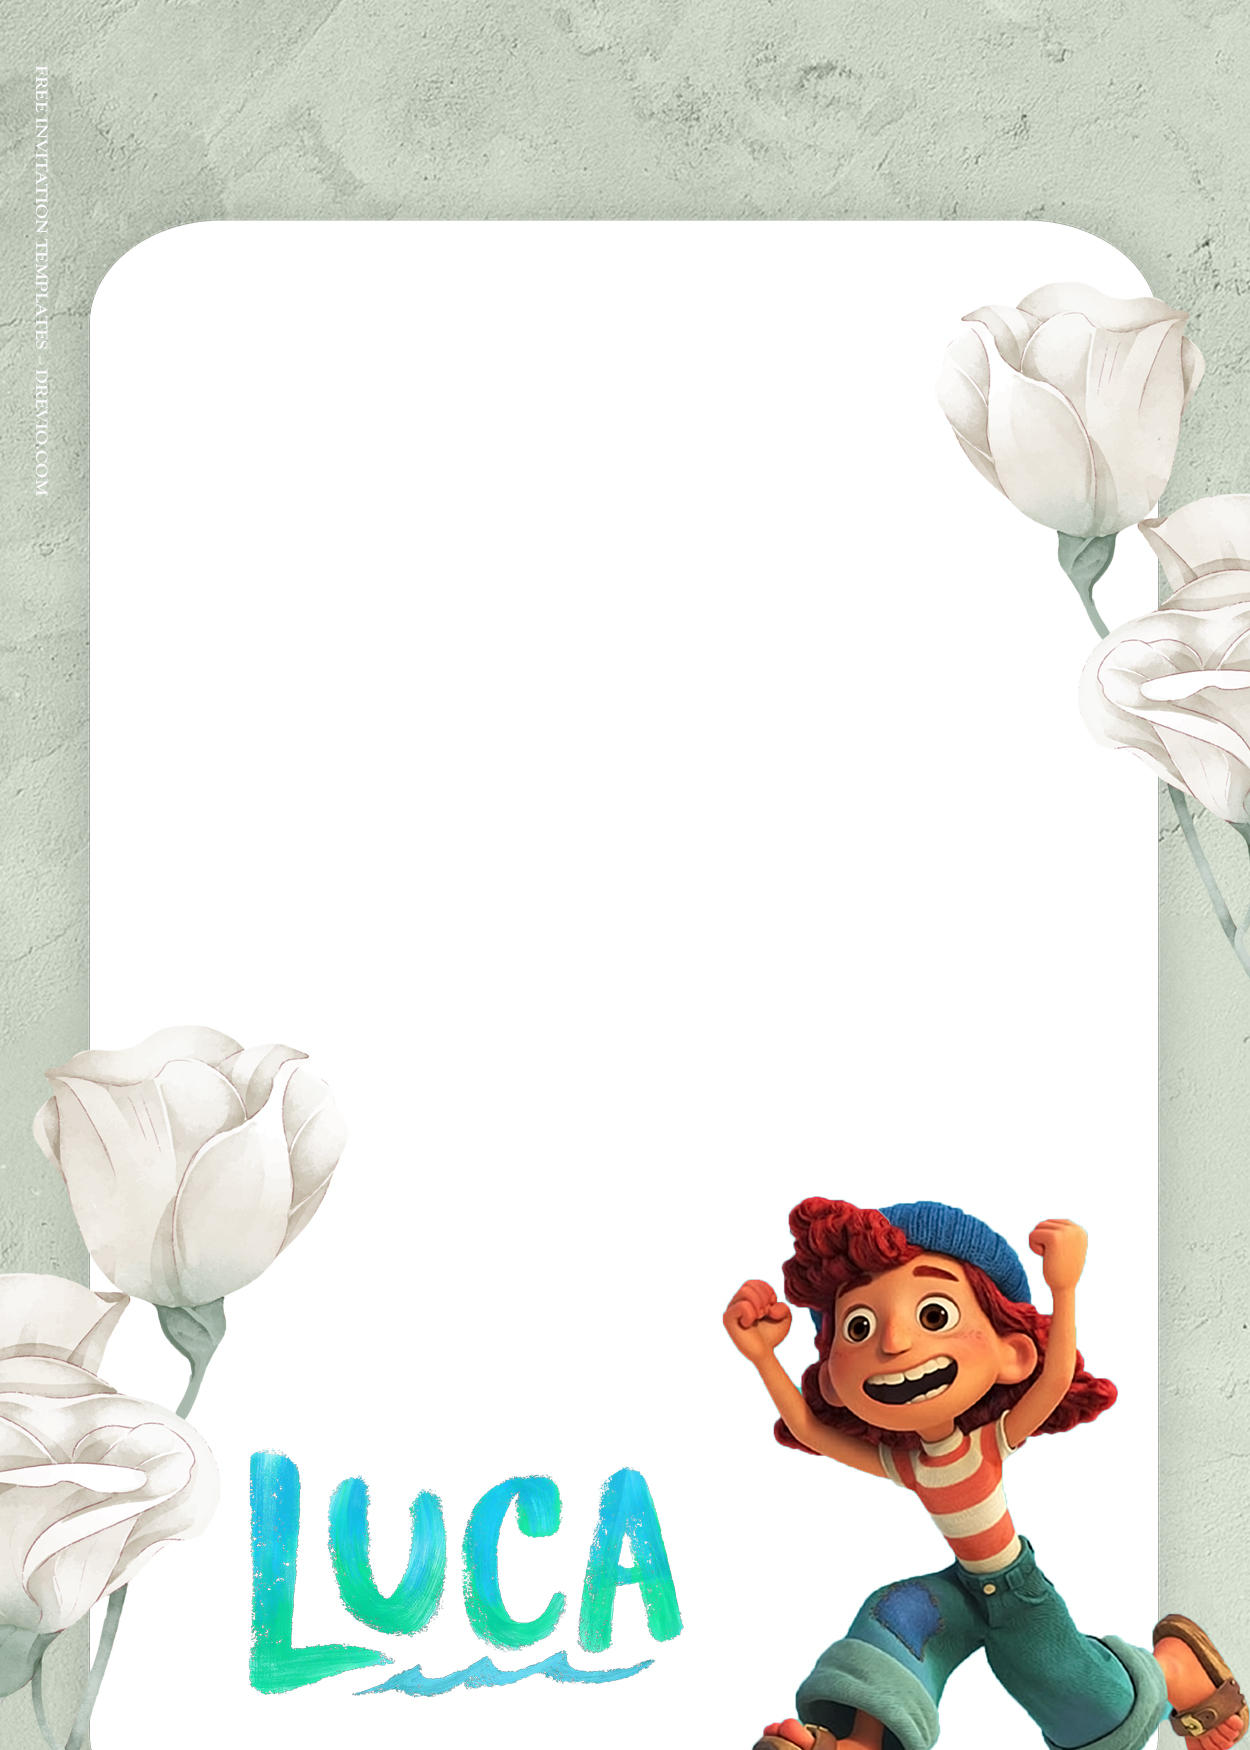 8+ Under Water Blossom With Luca Birthday Invitation Templates Five